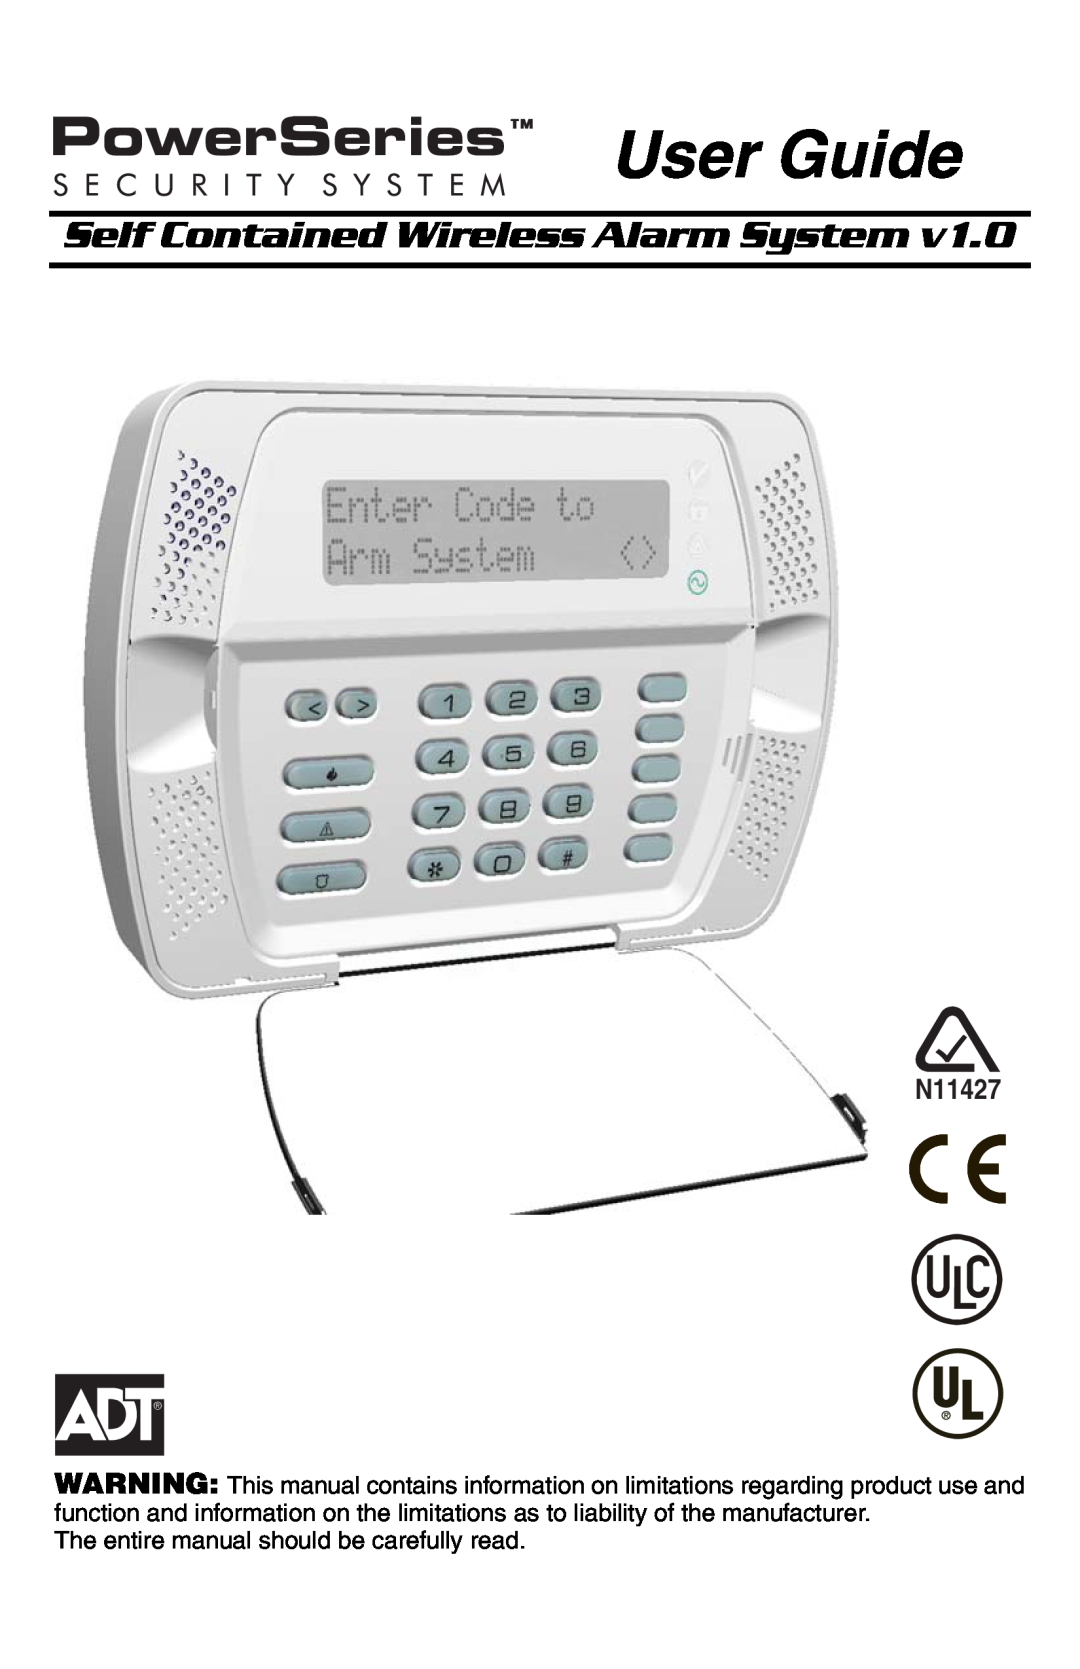 ADT Security Services SCW9047-433, SCW9045-433 manual User Guide, Self Contained Wireless Alarm System, N11427 